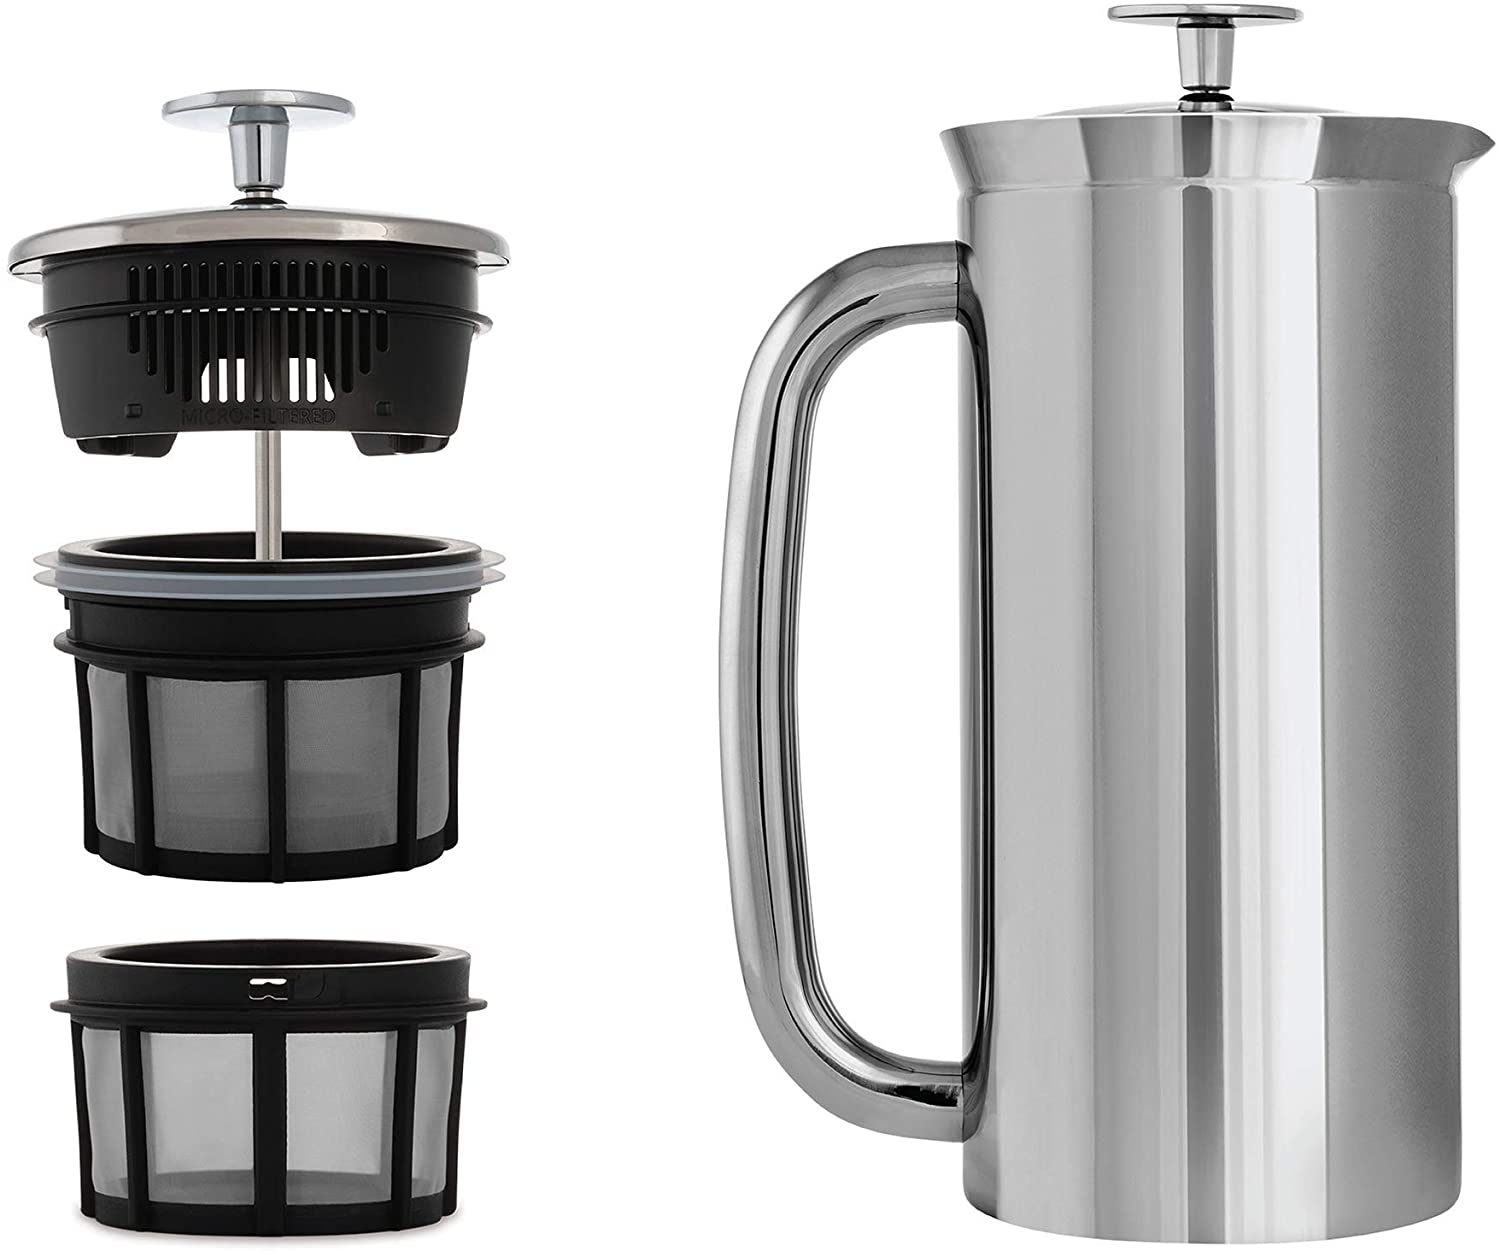 ESPRO 1018C2 French Press P7, Coffee Stamp Jug with Thermal Function, Coffee Maker, 0.55 Litres, High-Gloss, Stainless Steel, Polished Stainless Steel